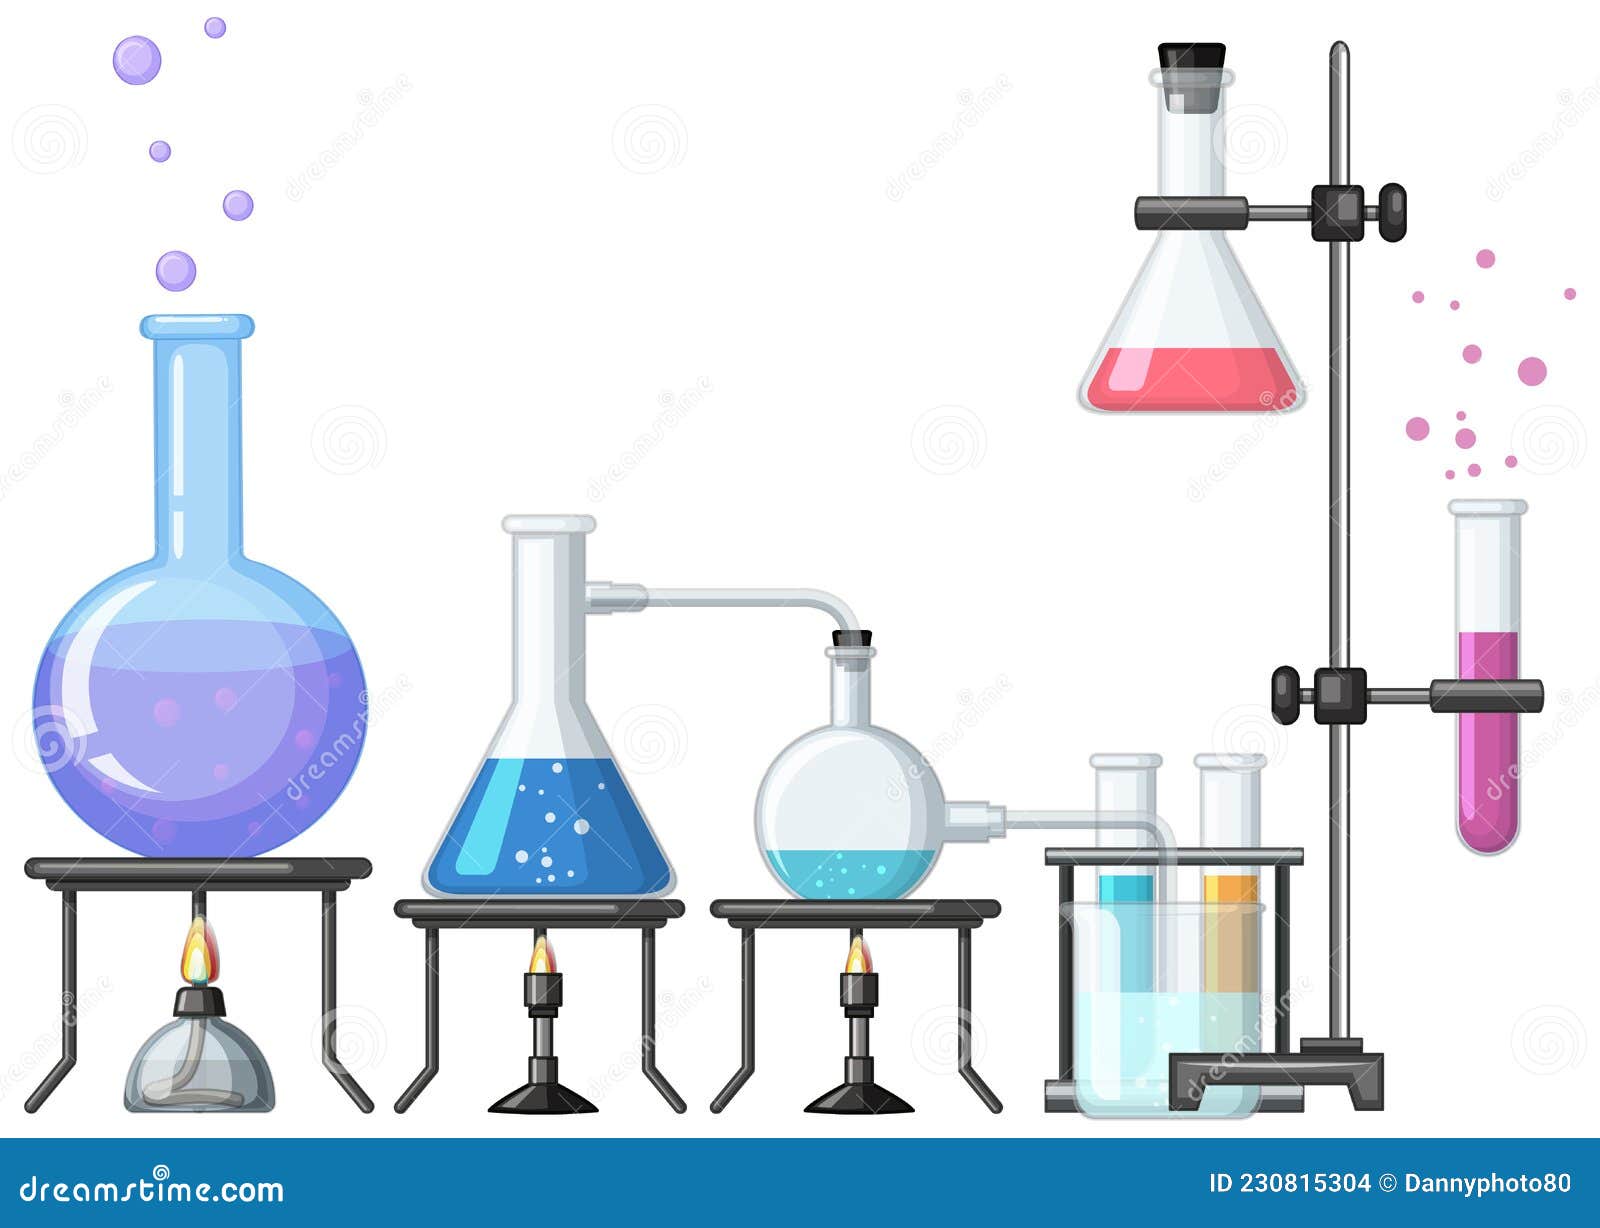 Chemistry Element on the Table Stock Vector - Illustration of character ...